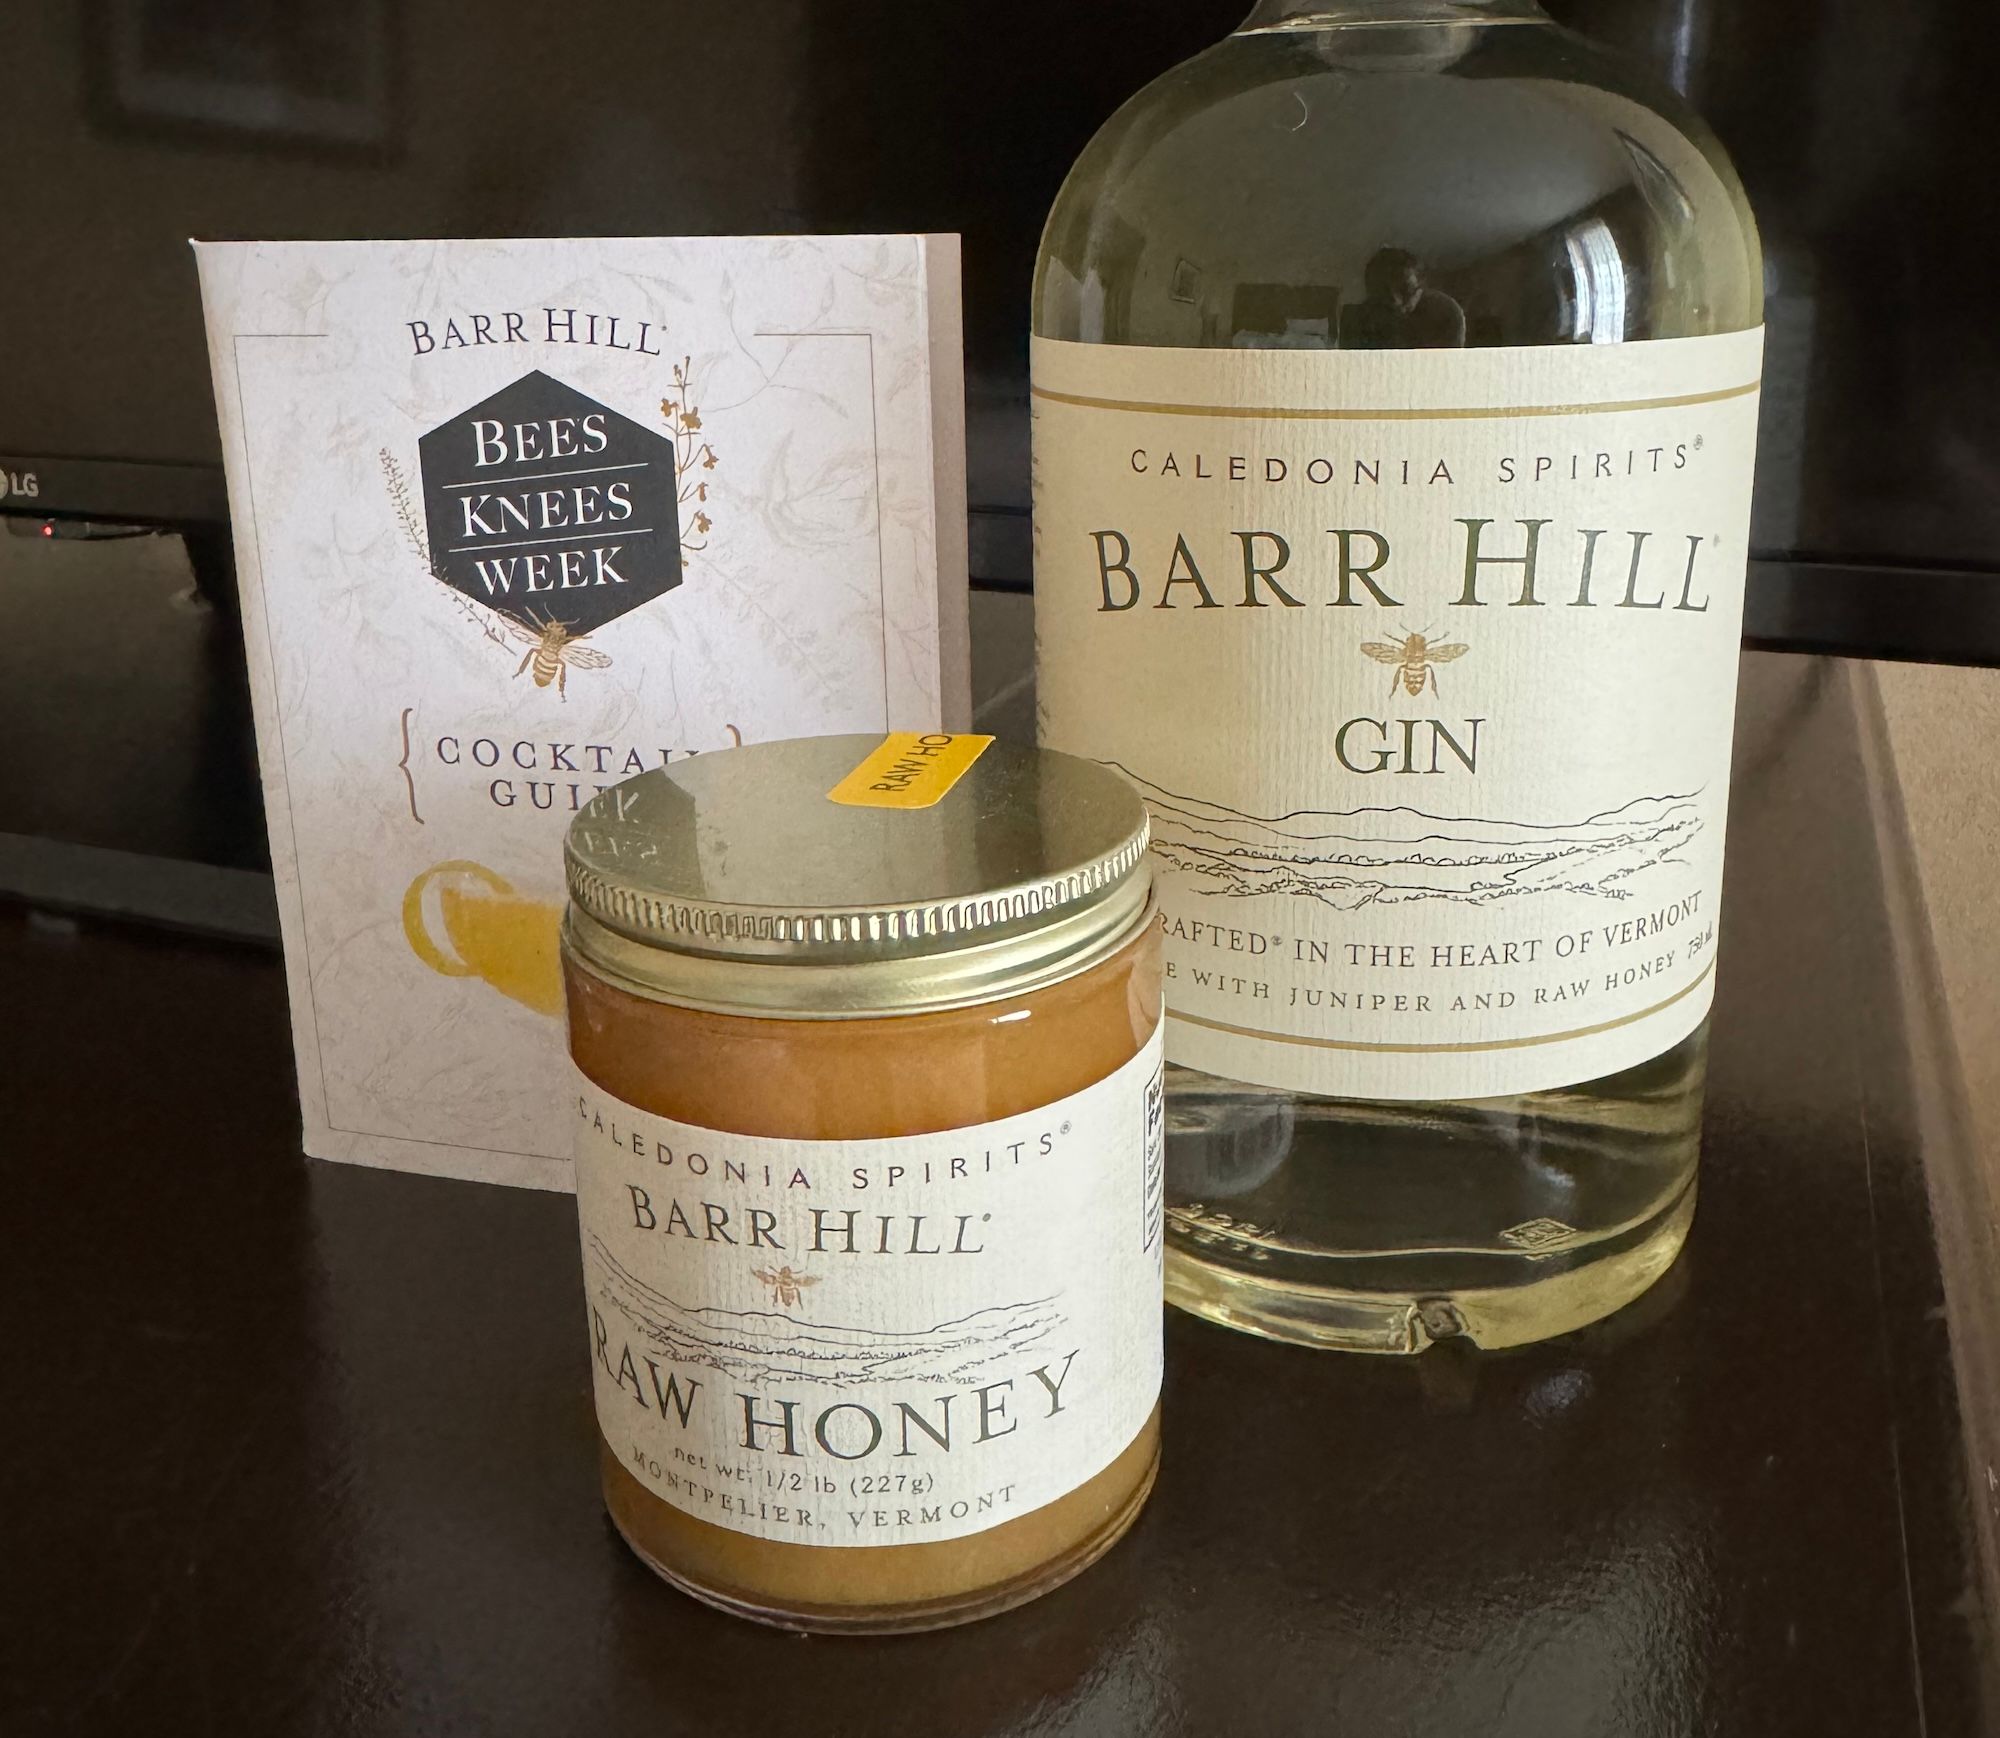 Barr Hill gave us a free jar of honey with a bottle purchase!